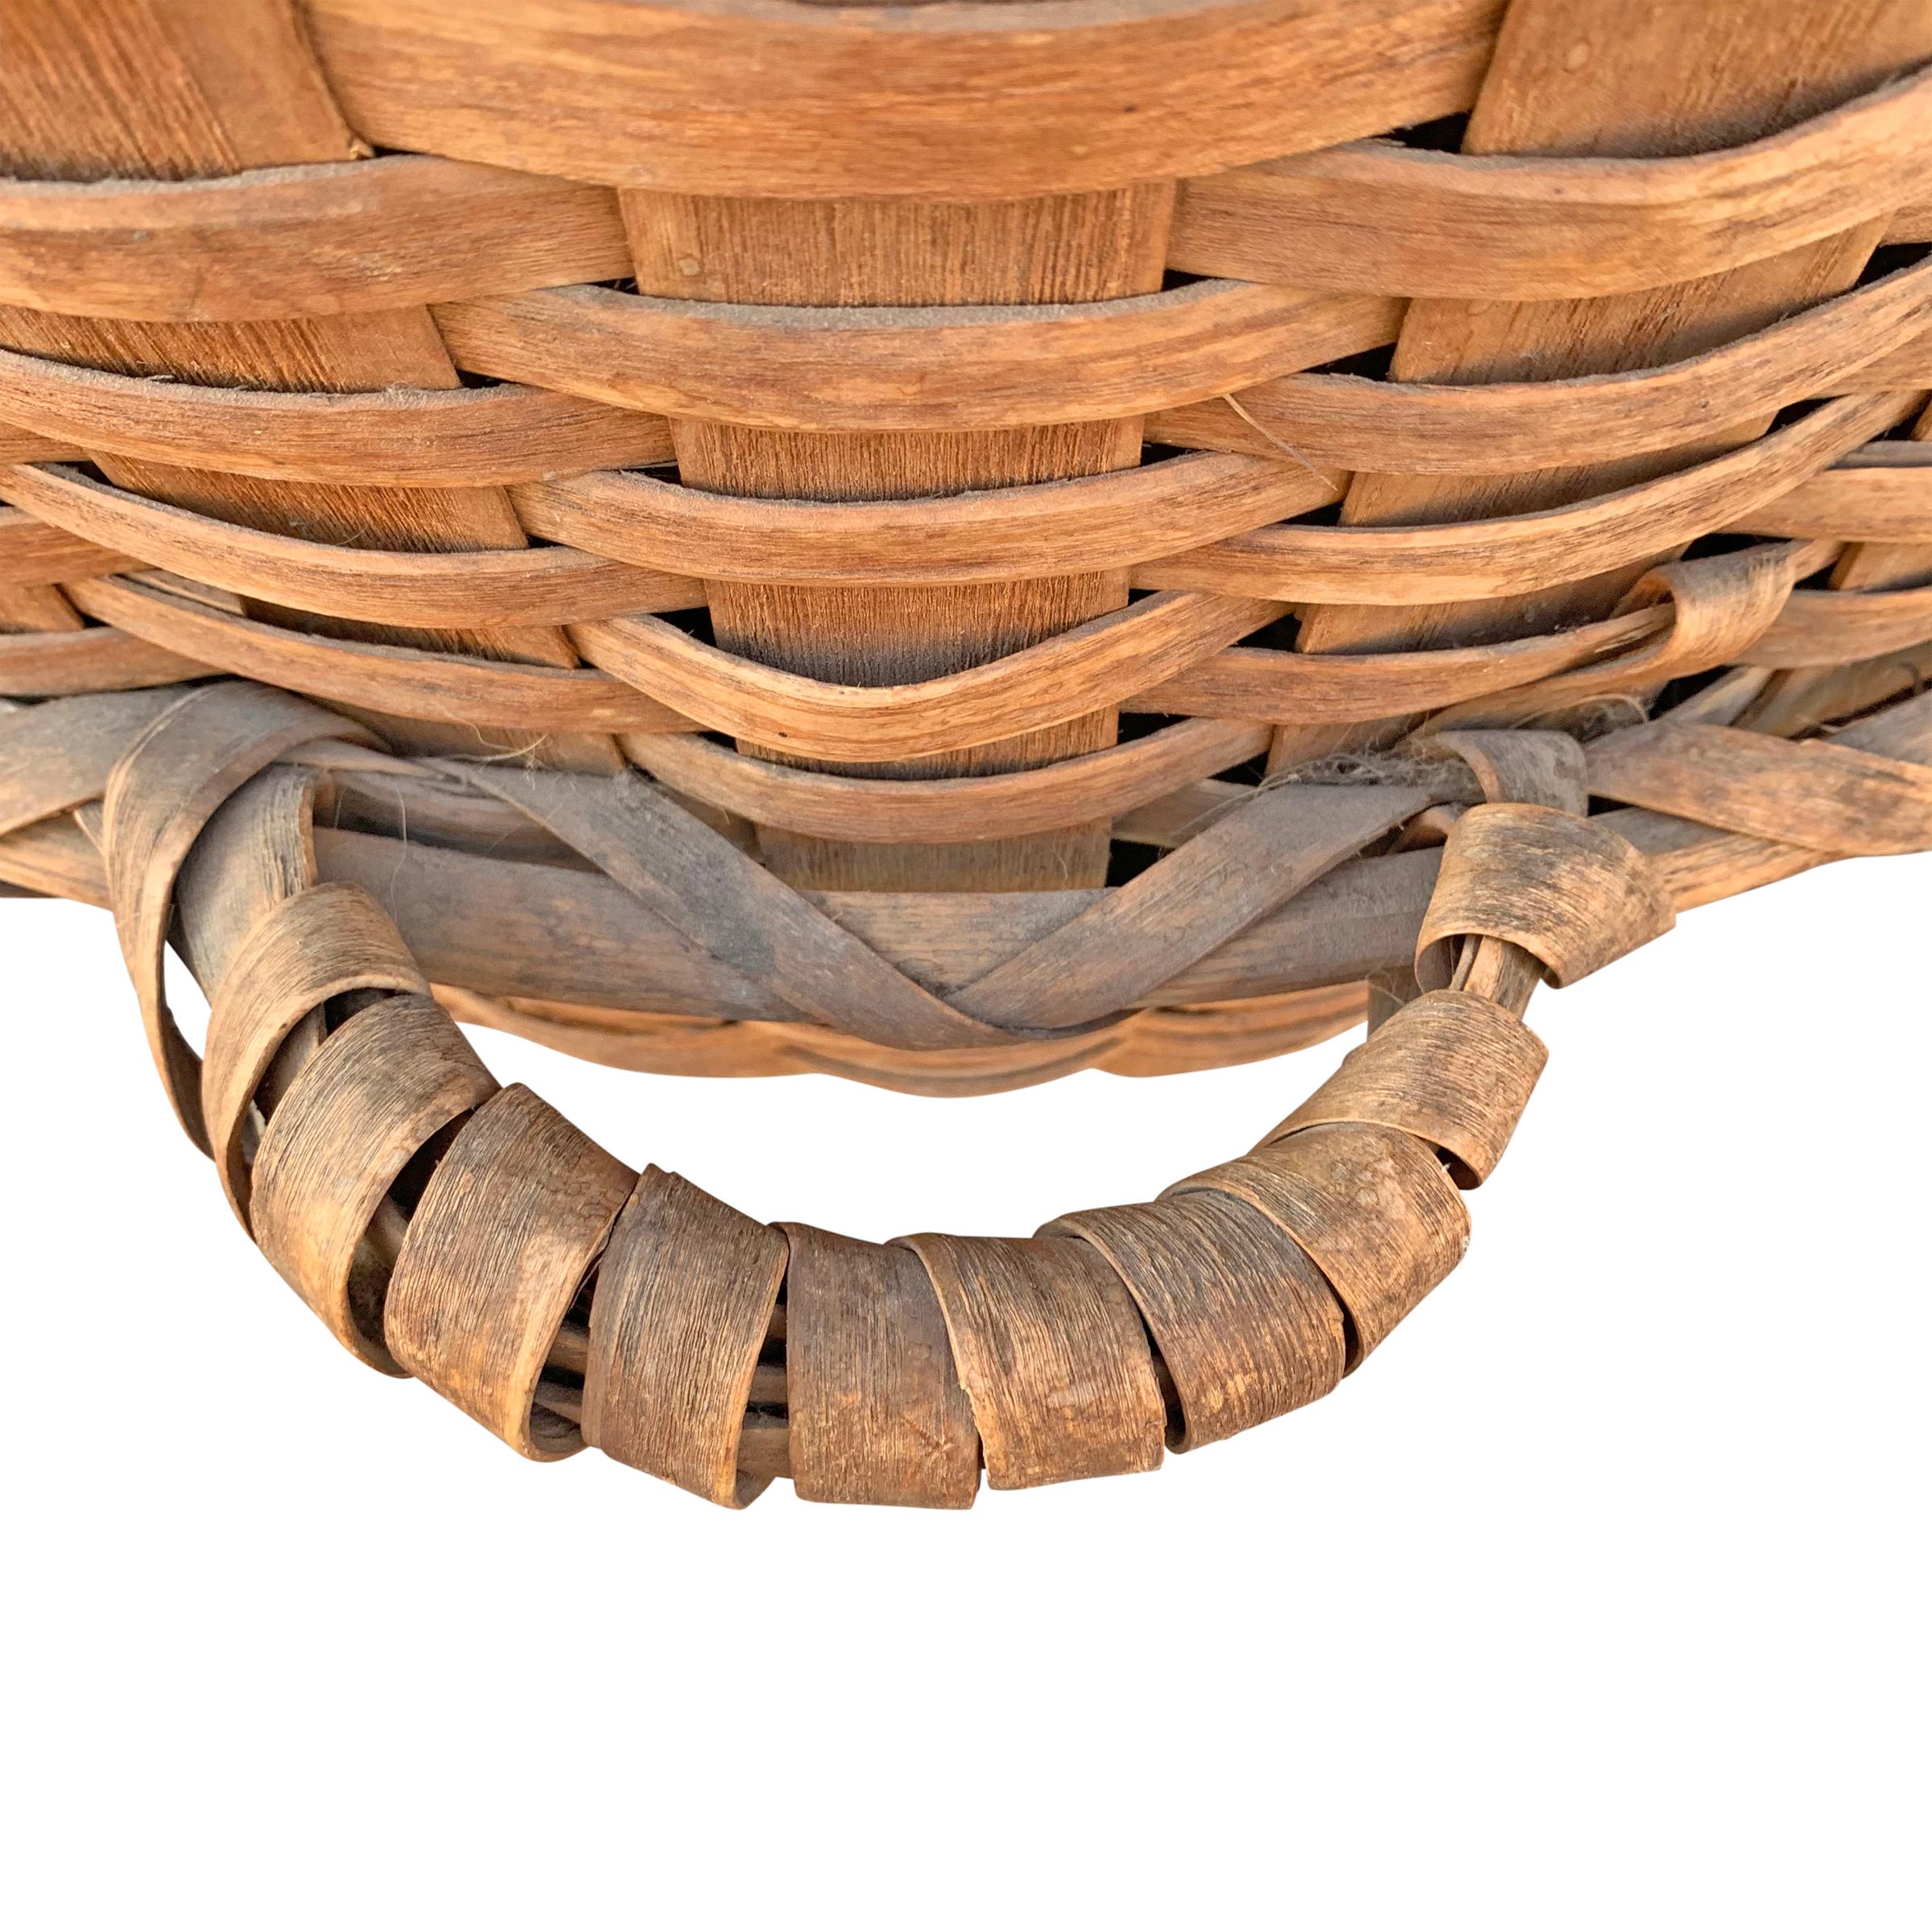 Monumental 19th Century American Feather Basket For Sale 5